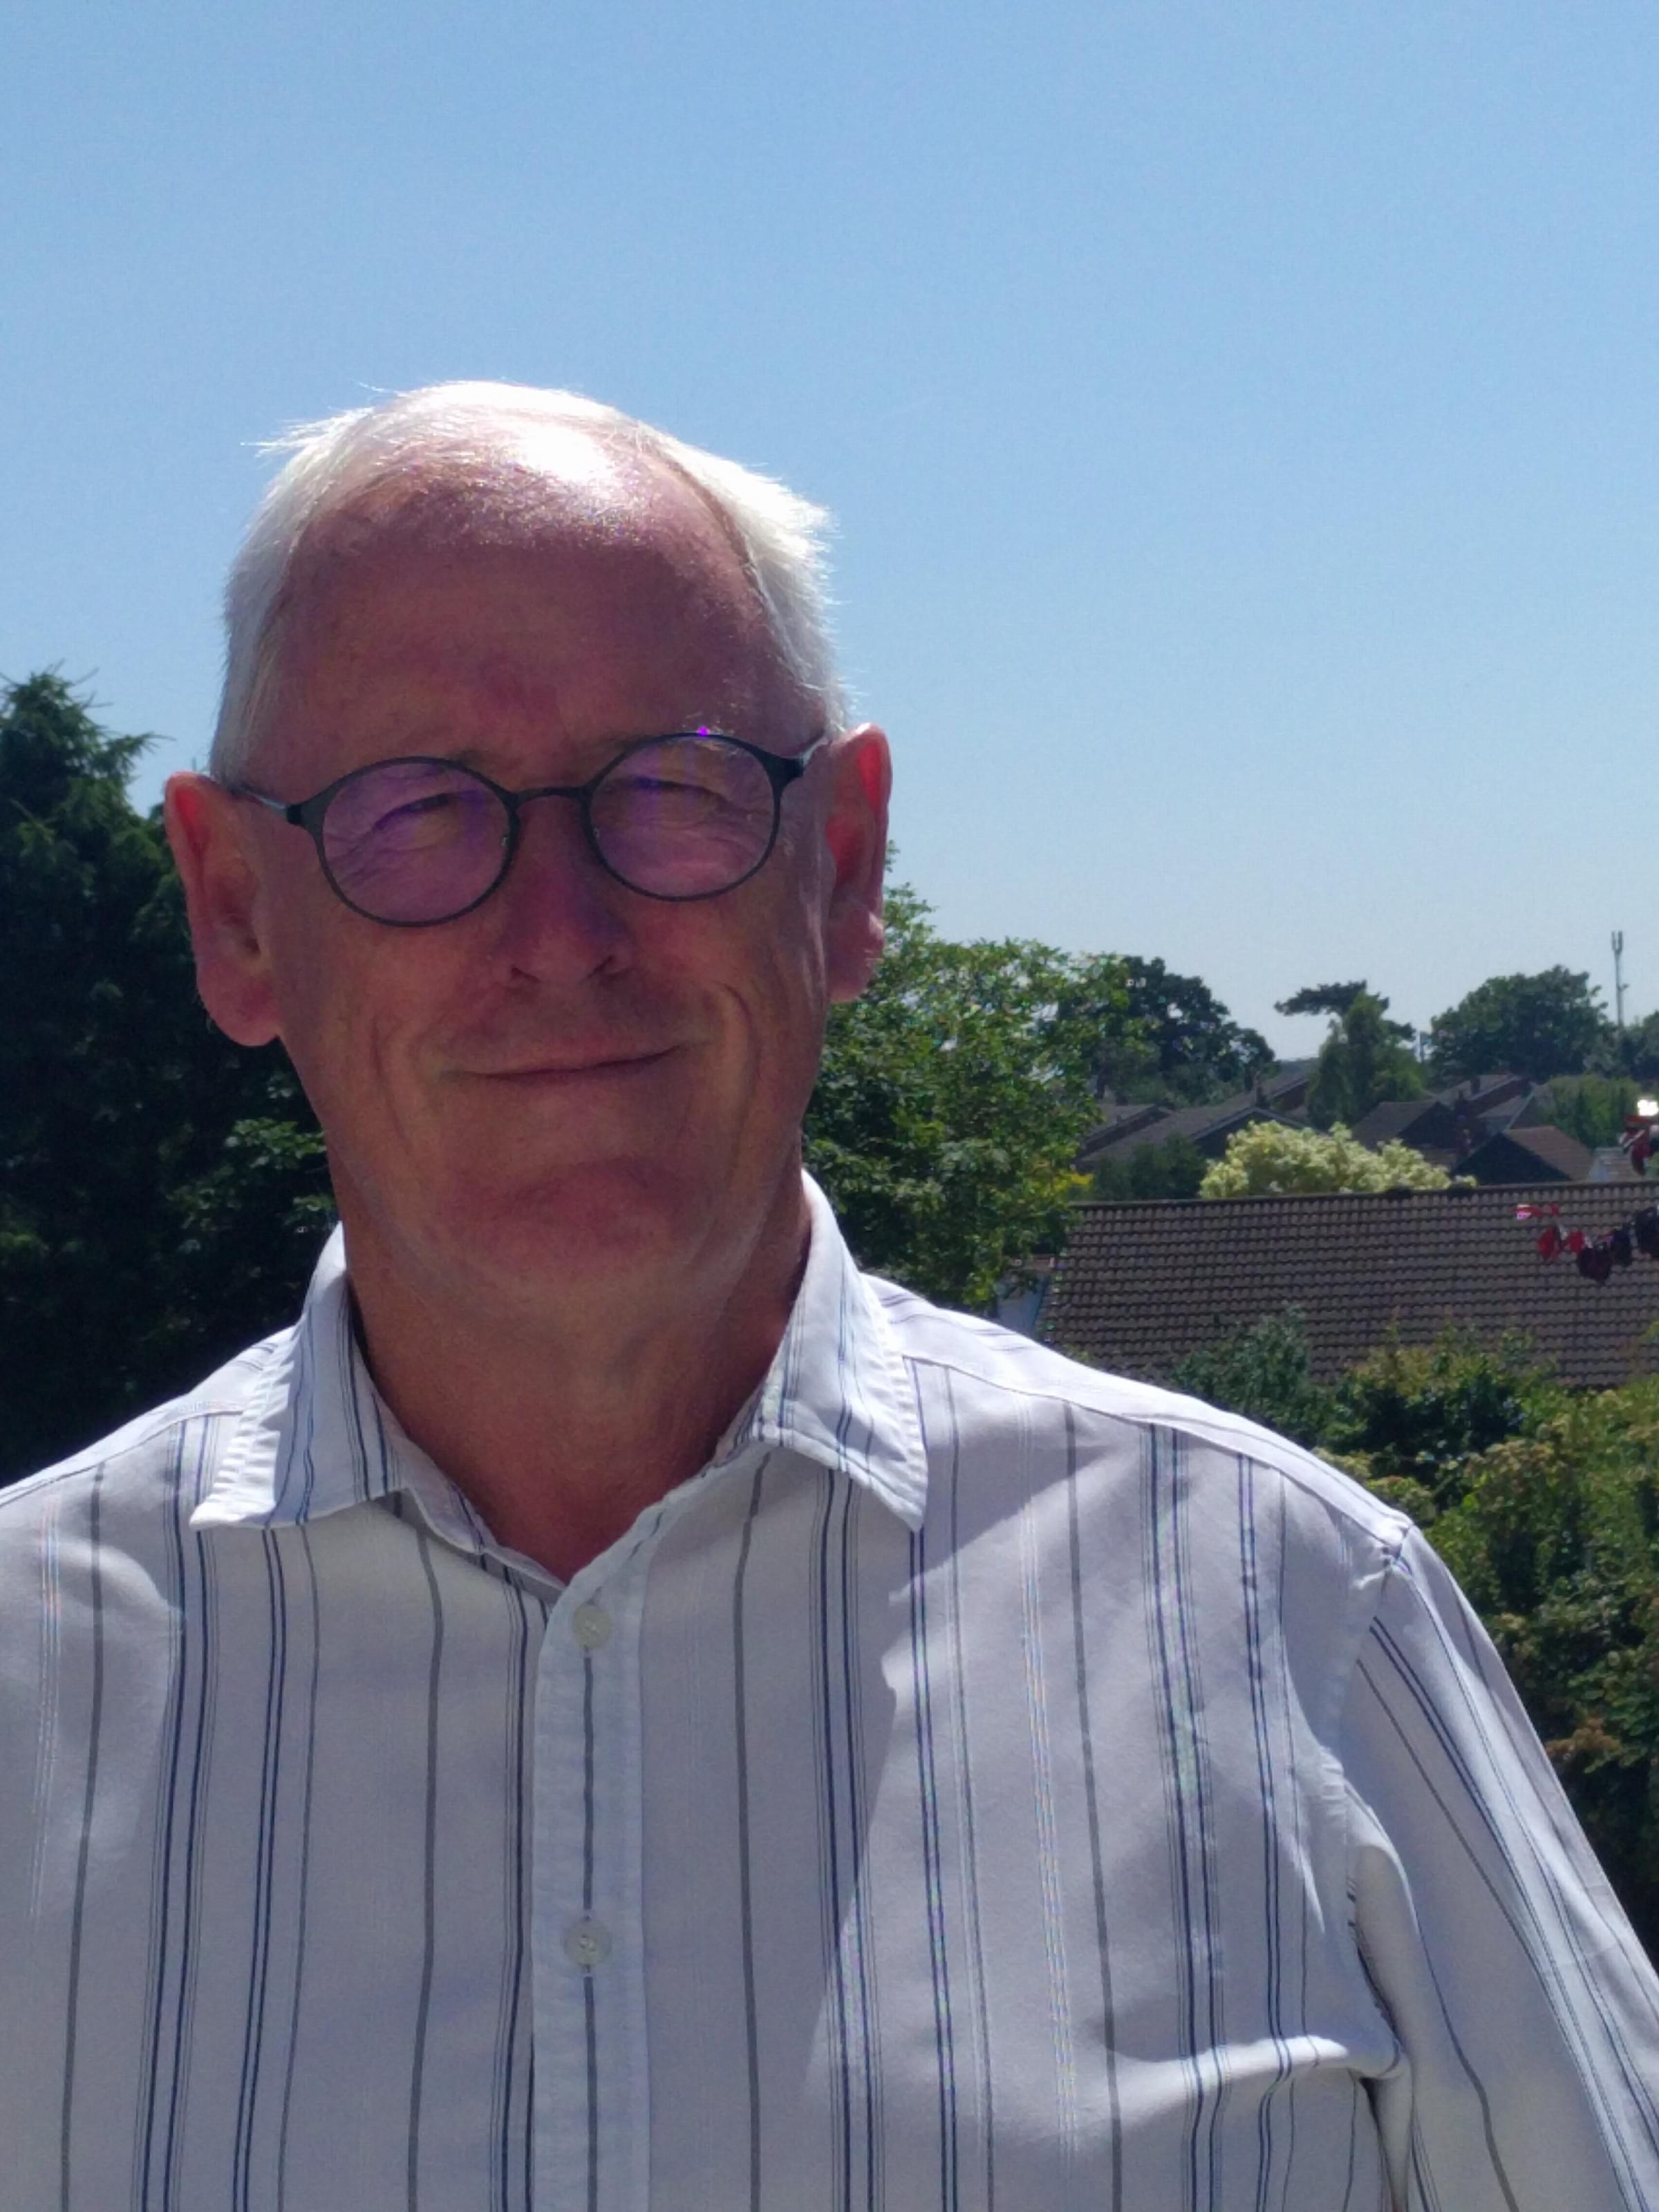 Battle - Labours Cyril Liddy is hoping to retain Wivenhoe, one of the hardest wards to call